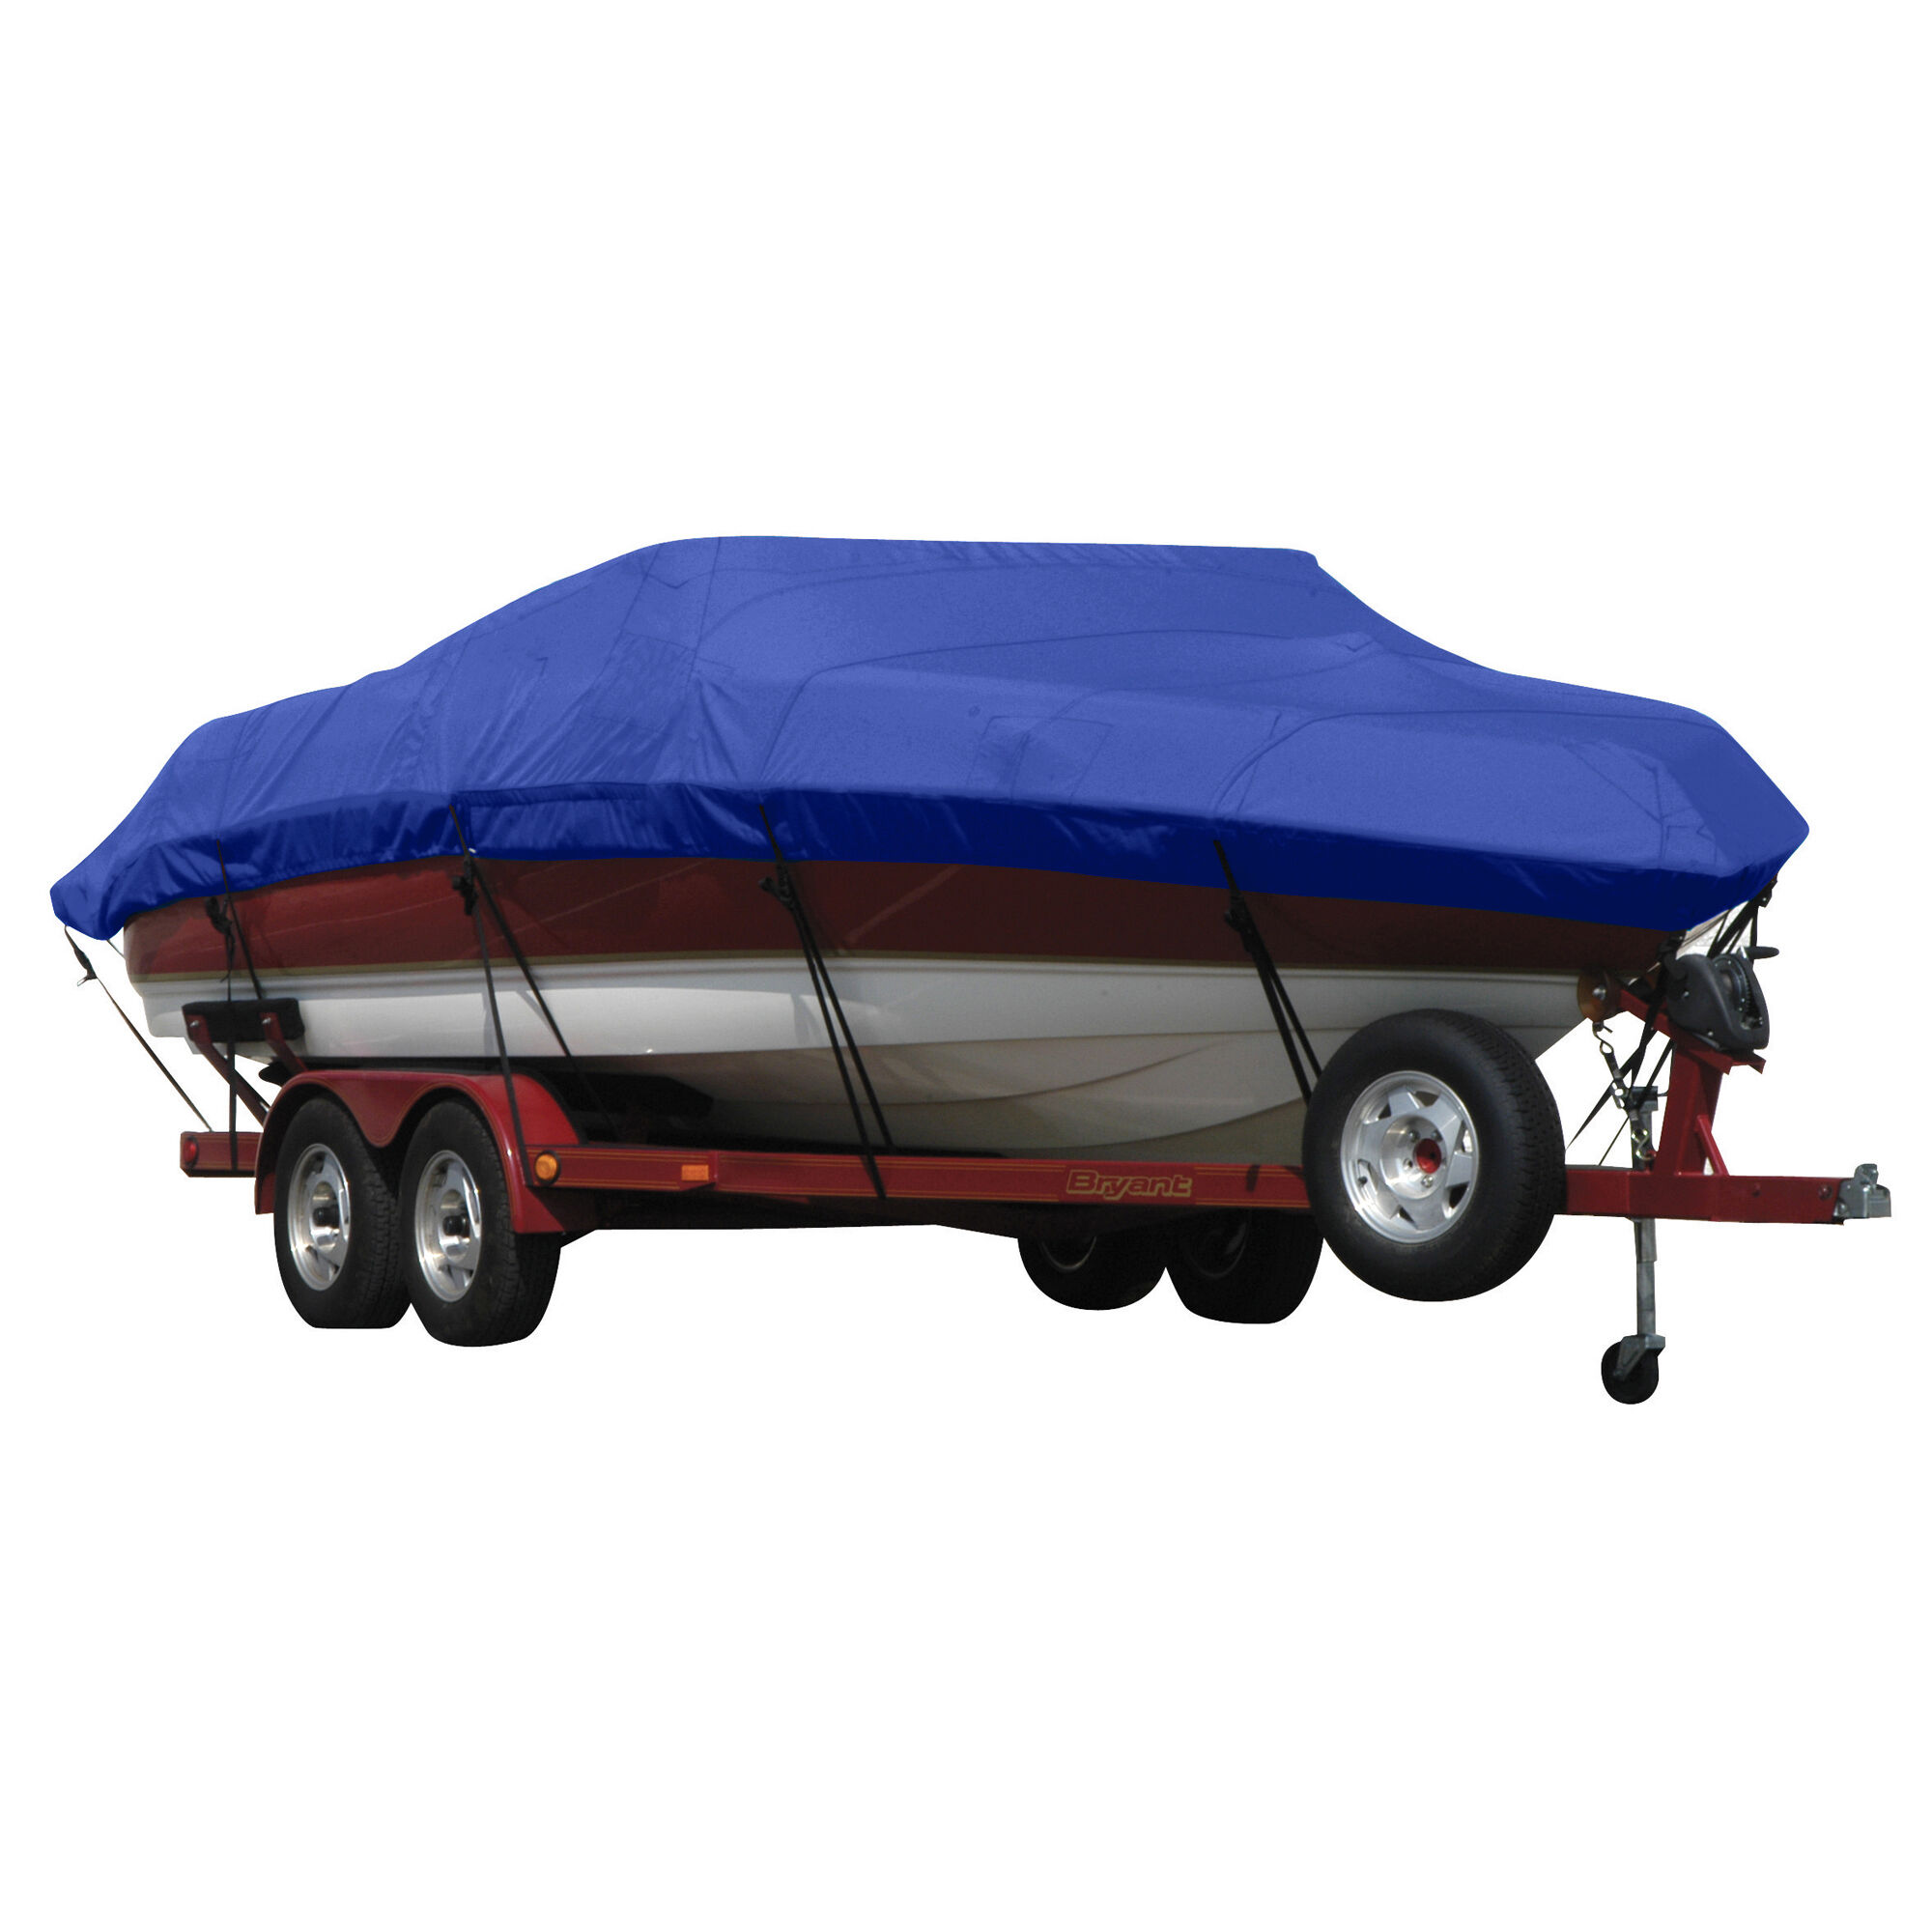 Covermate Exact Fit Sunbrella Boat Cover for Cobalt 272 272 Bowrider w/ Bimini Cutouts Does Not Cover Extended PLATFORMm I/O. Ocean Blue